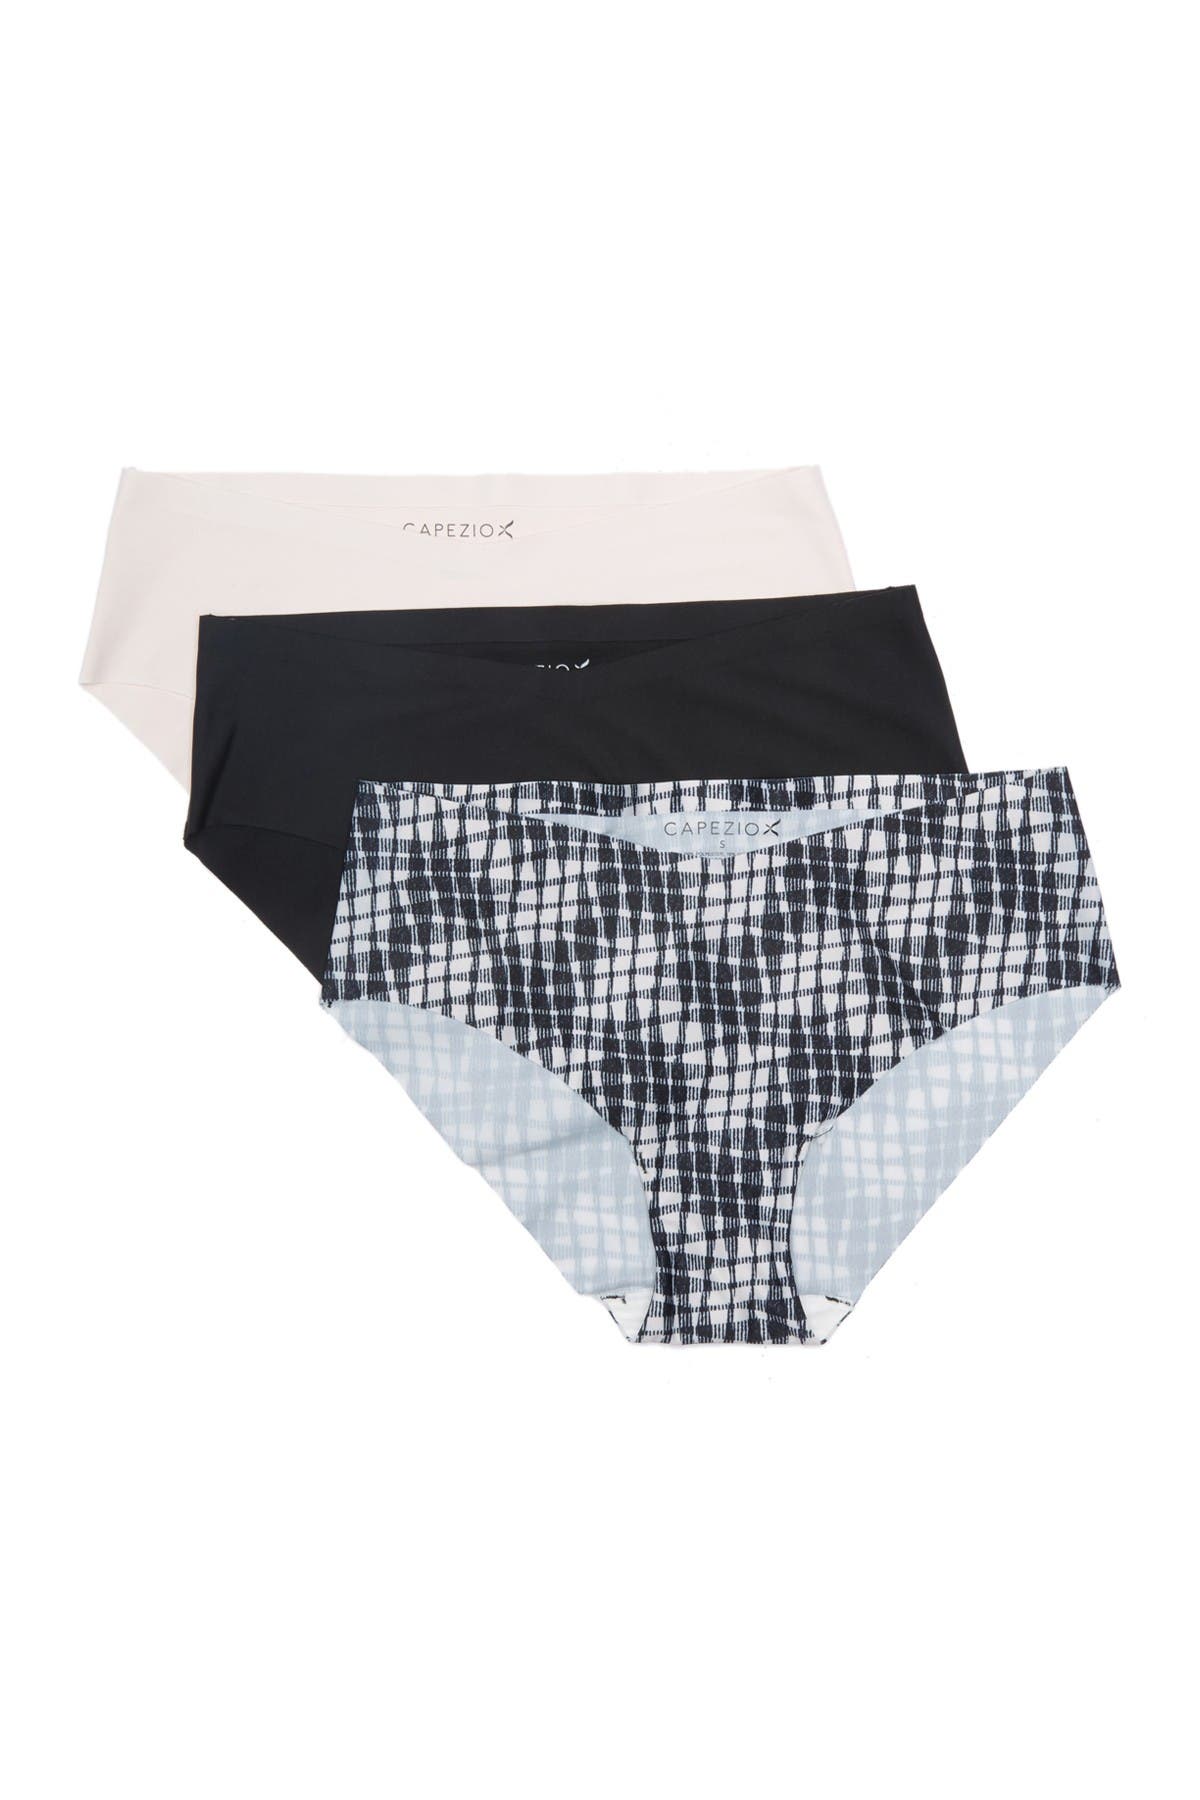 Studio By Capezio Seamless Hipster Panties In Wave Plaid